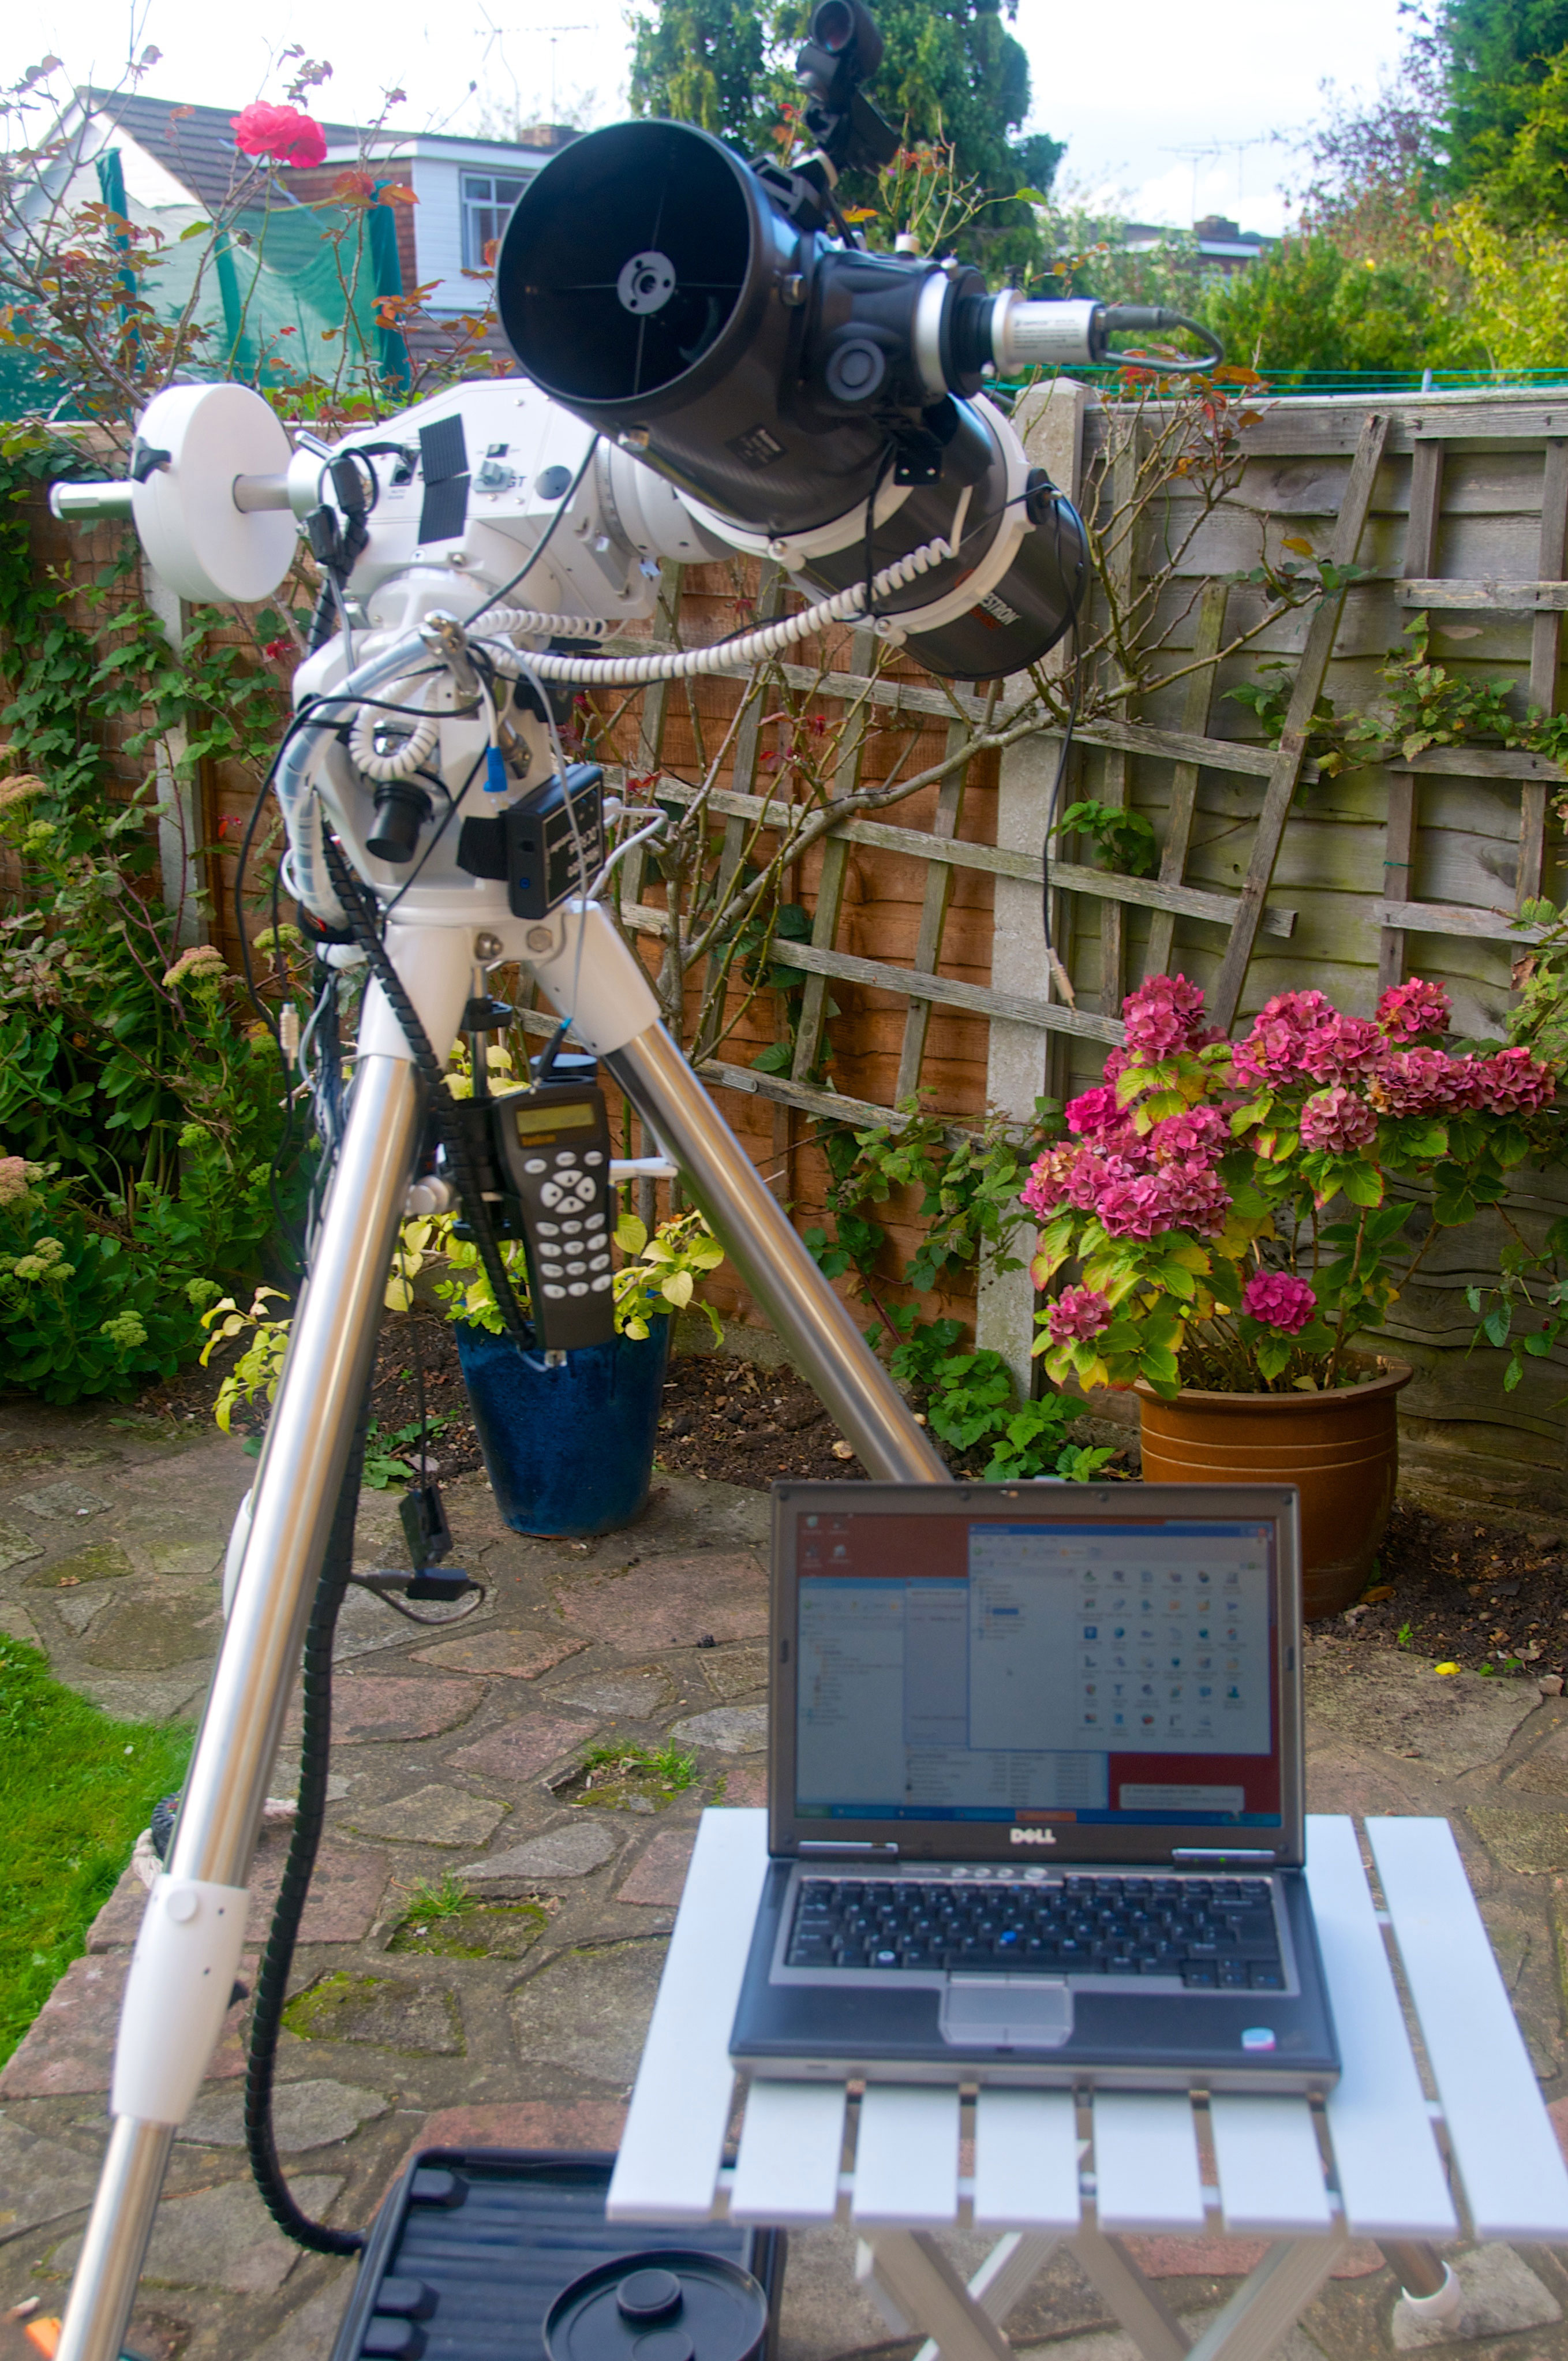 All set up and ready for a night of lunar imaging. Credit Mike Barrett